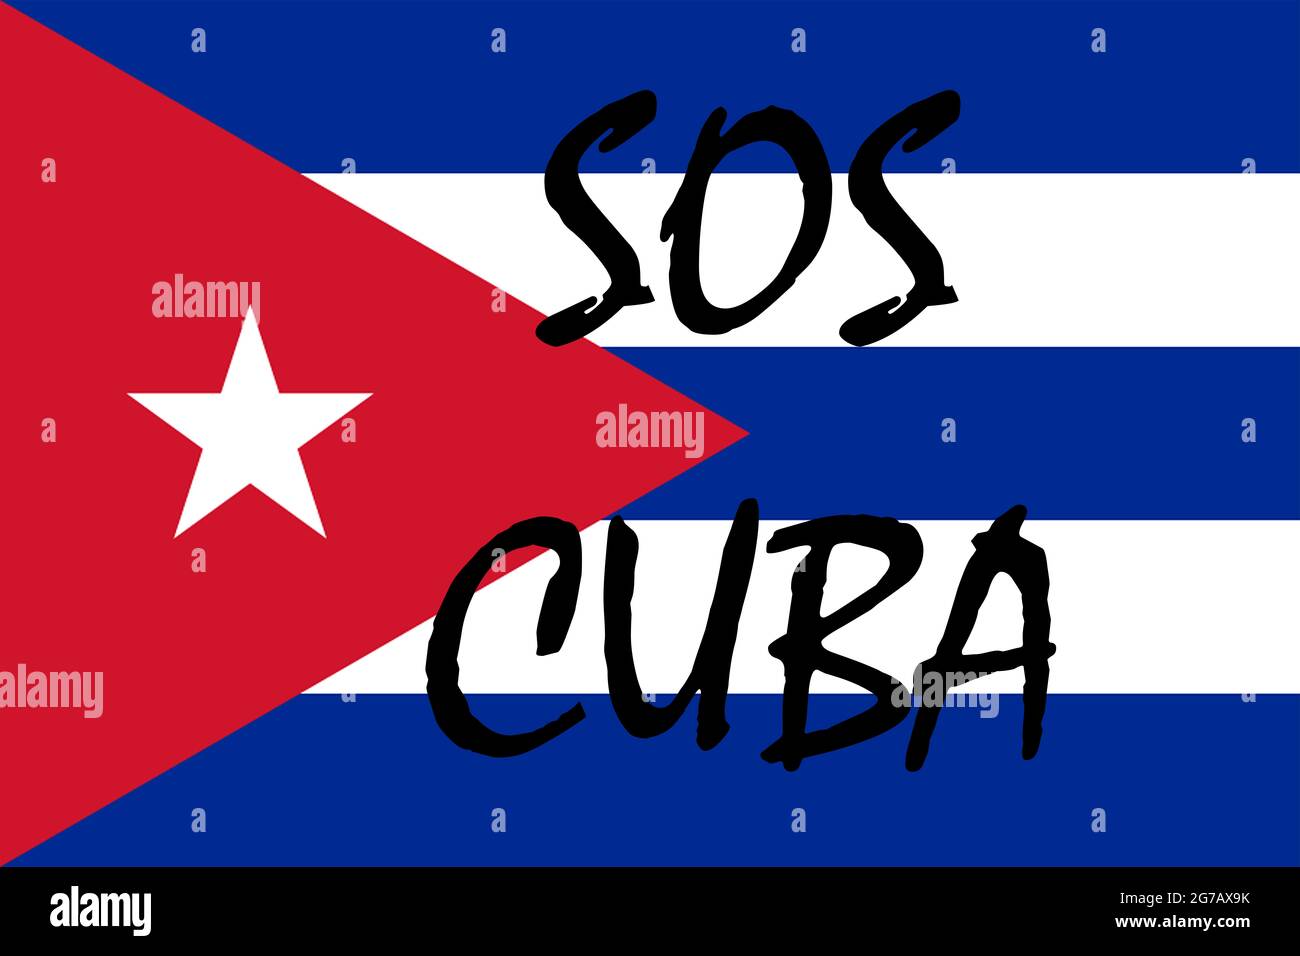 Cuban flag with SOS Morse code text to represent the help Cuban people are asking for in Cuba. Stock Photo